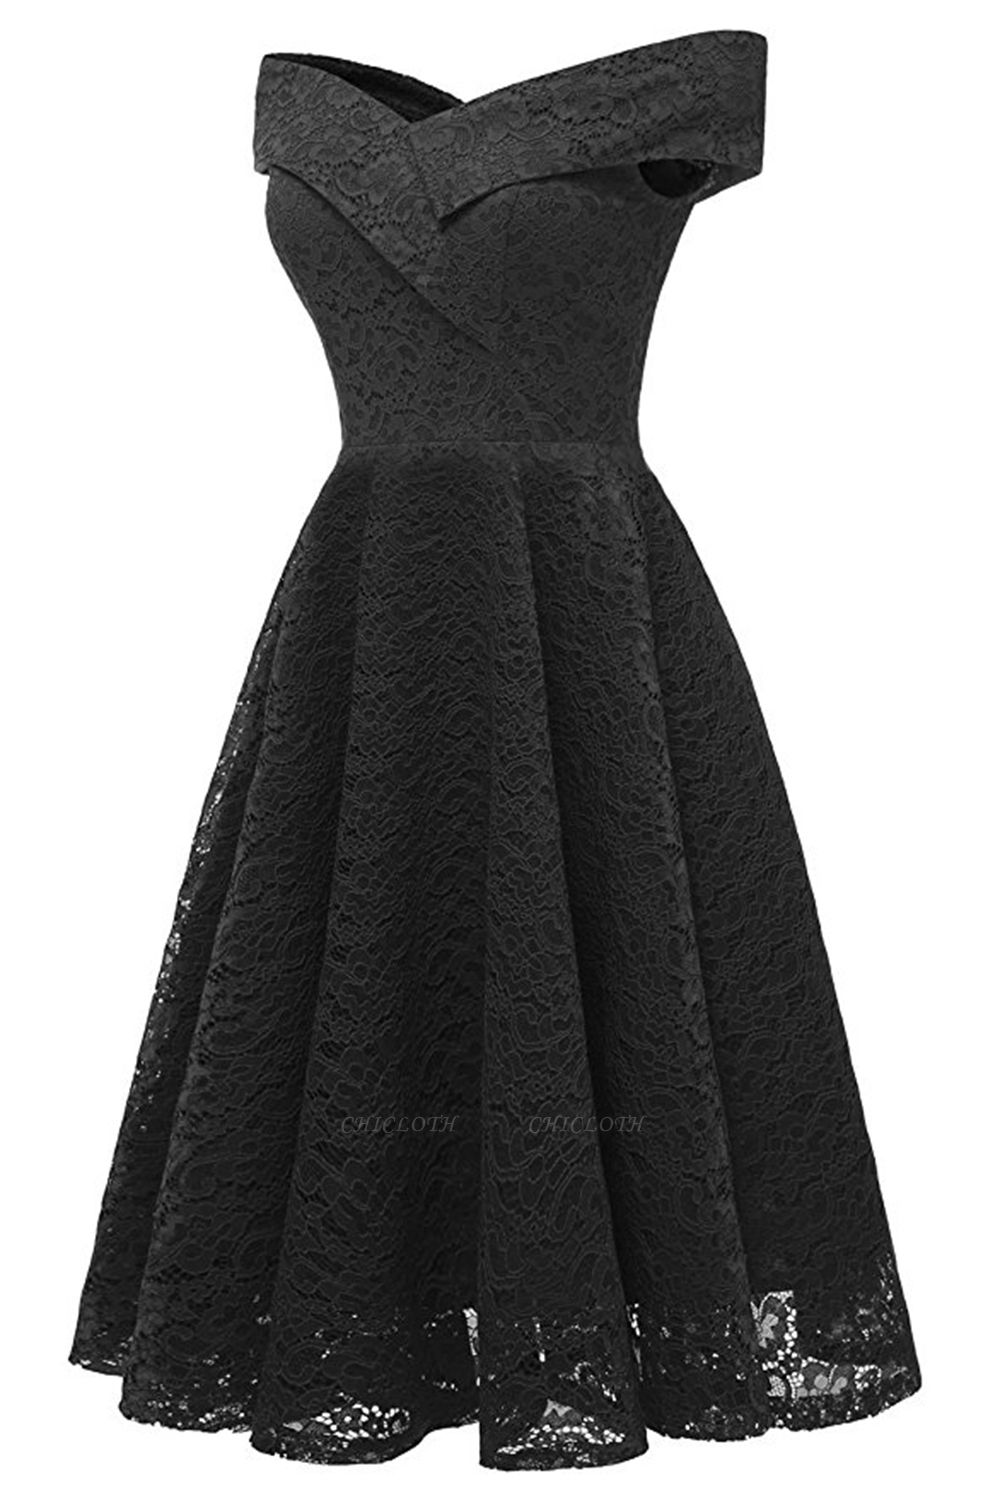 A| Chicloth Cute Lace Dress Wedding Party Formal Dress